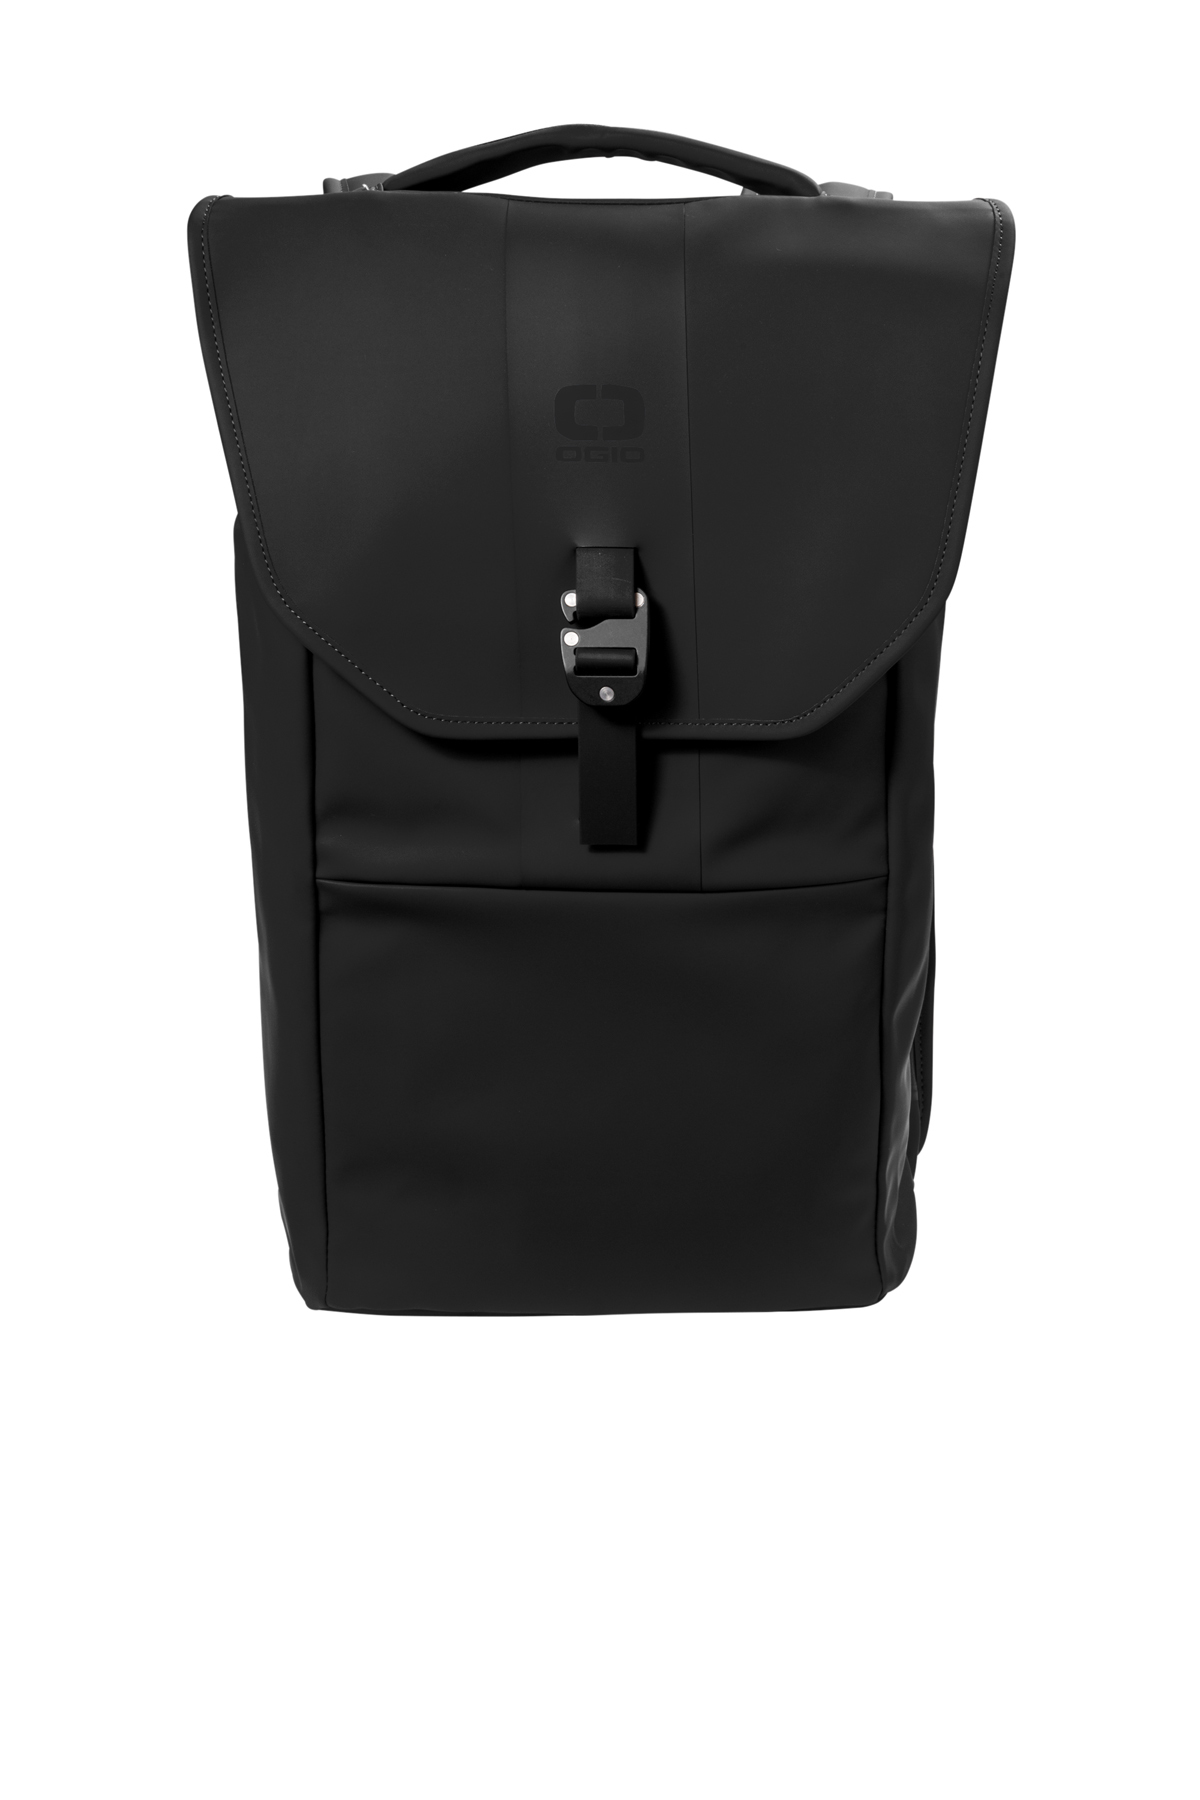 OGIO Resistant Rolltop Pack | Product | SanMar